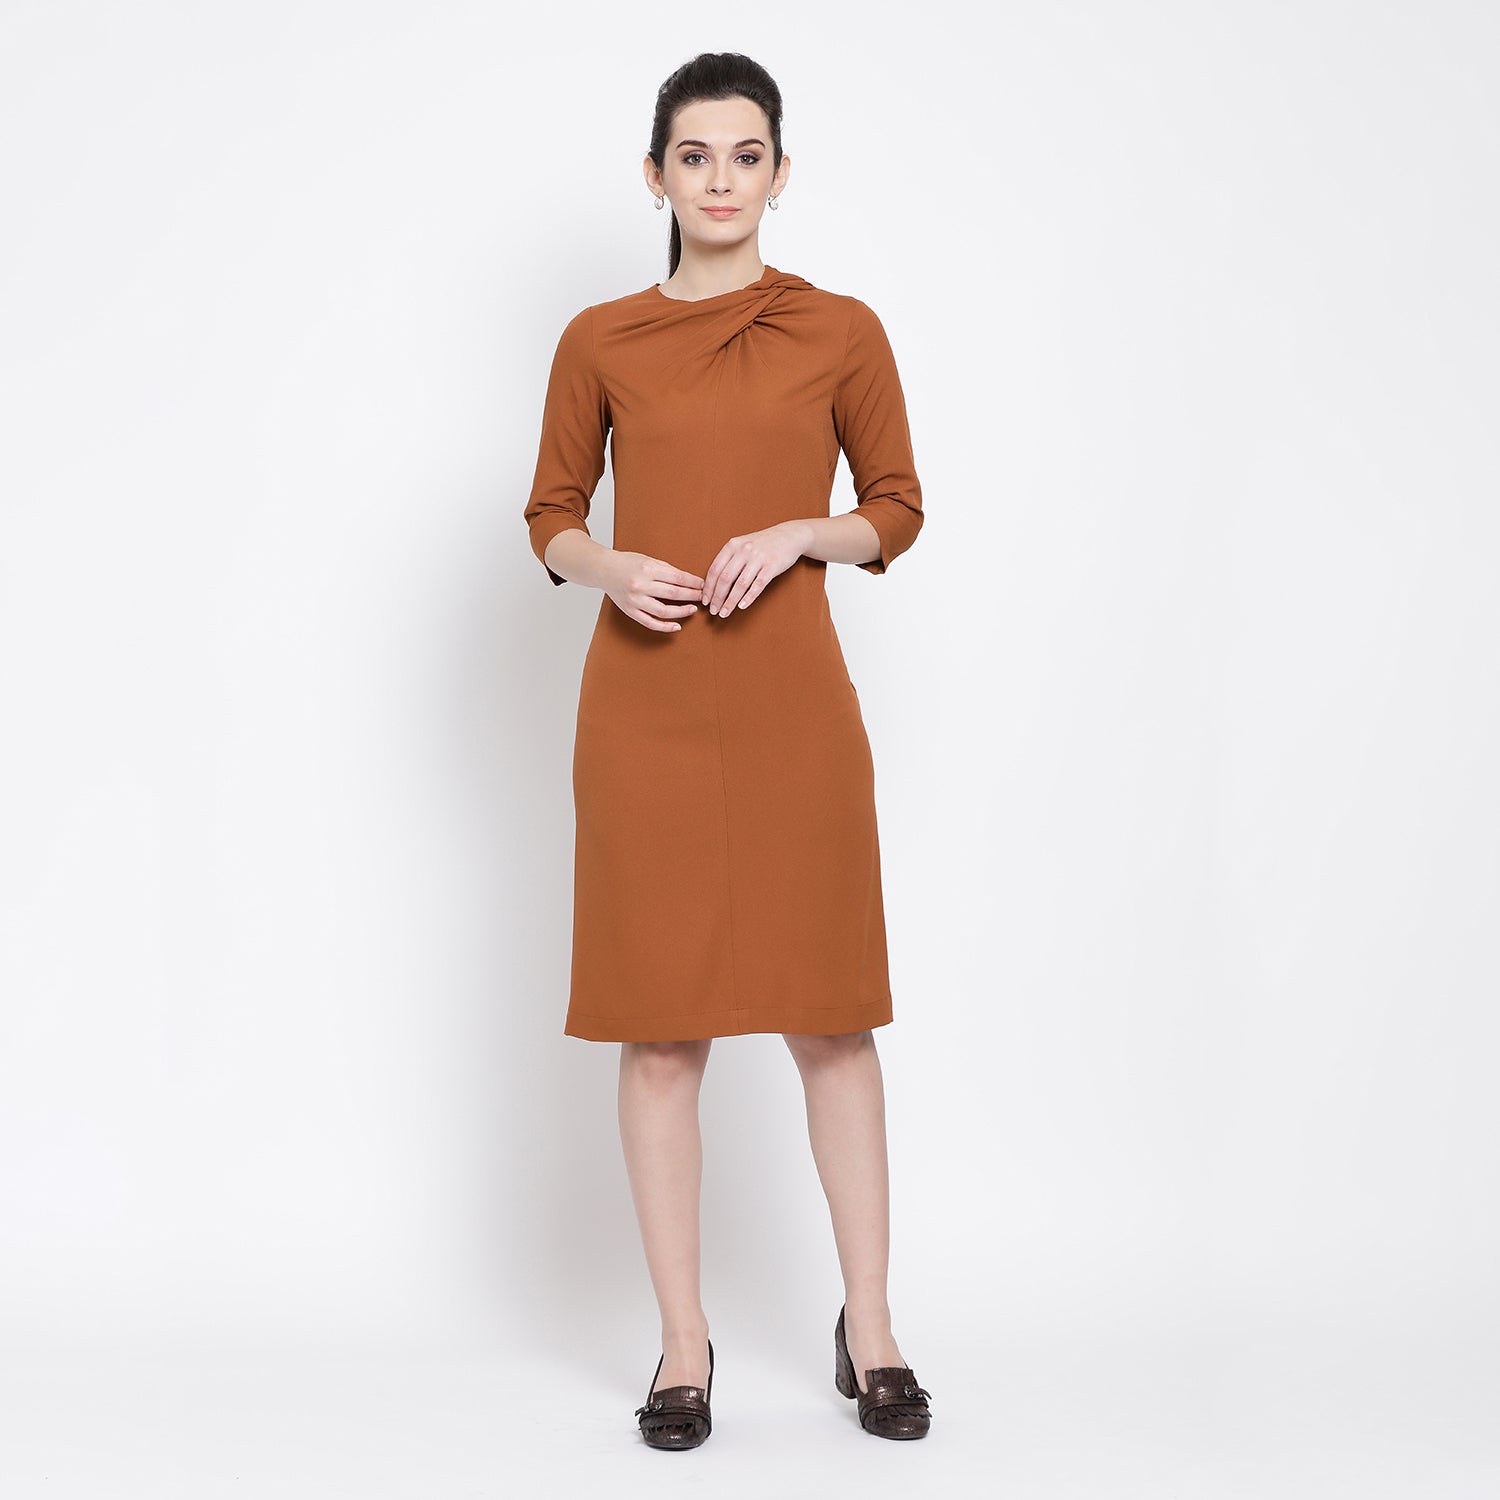 Rust Long Dress With Drape At Neck